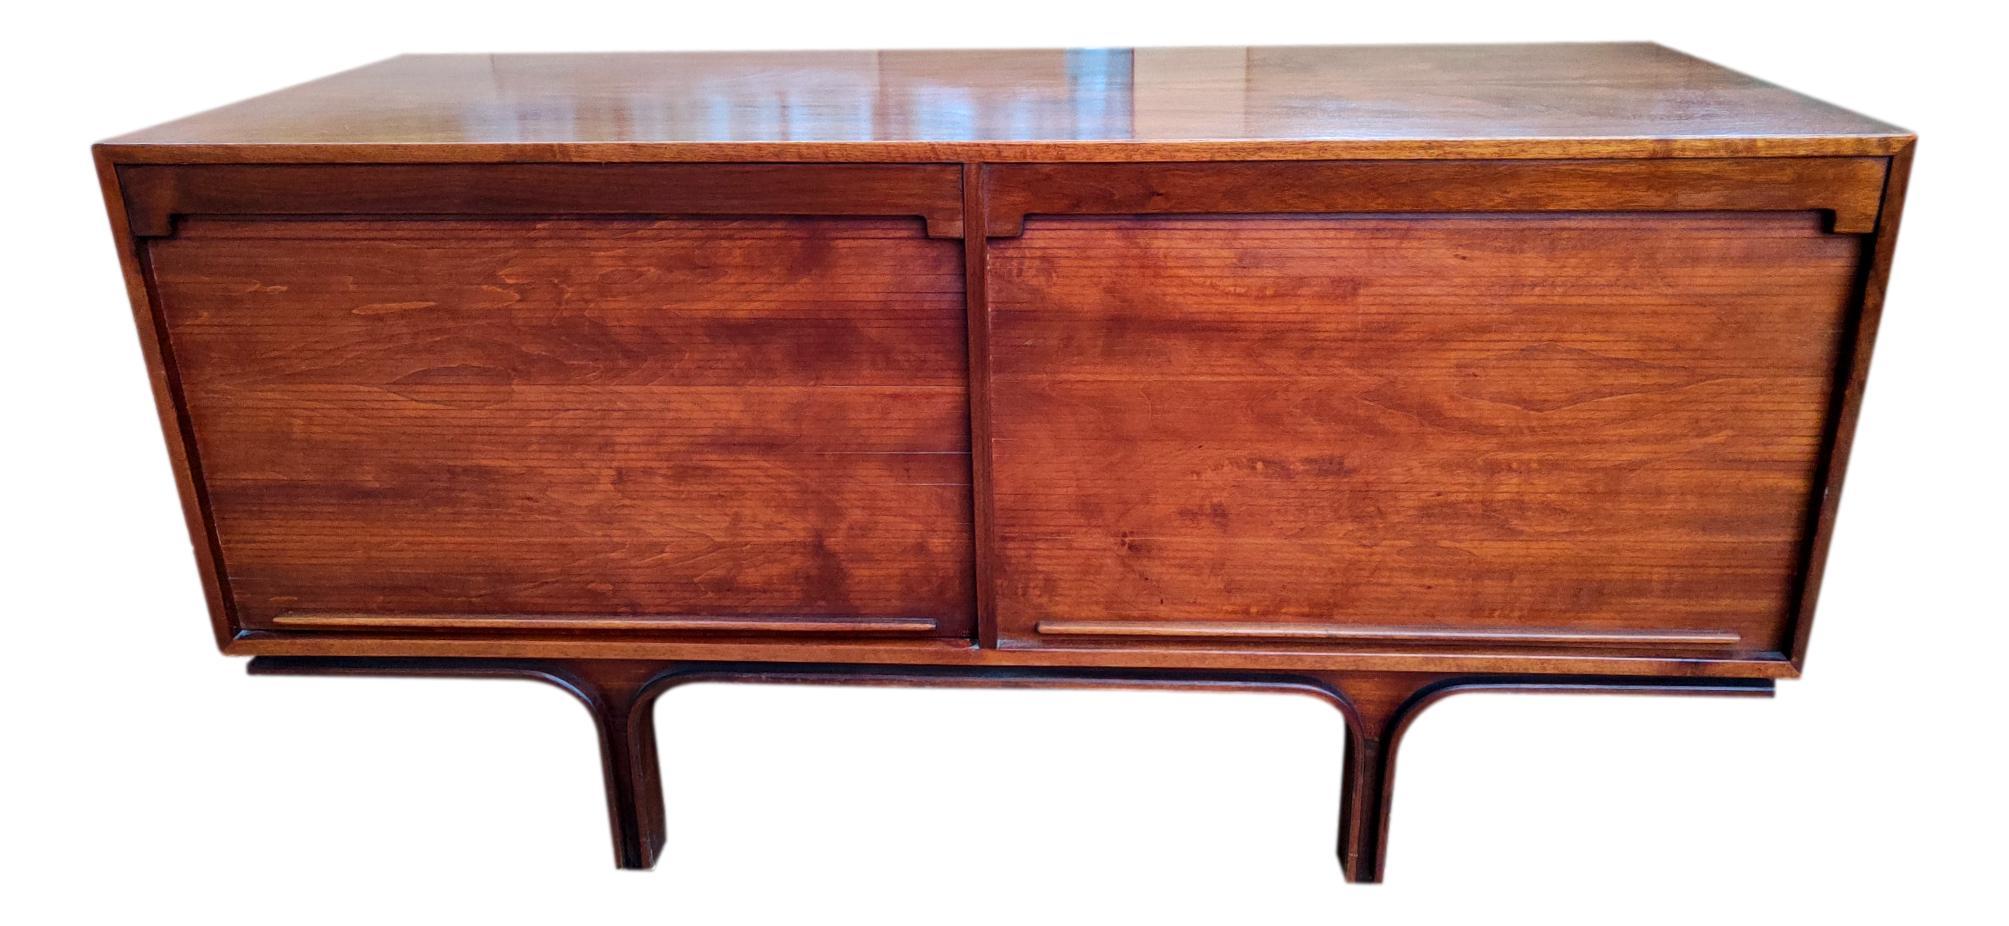 Wonderful sideboard by Gianfranco Frattini designed for Bernini, 1957.
Made in rosewood with two parts closed by shutters.
Very good conditions, as pics.

Measures: width cm 140, depth cm 53, height cm 71.